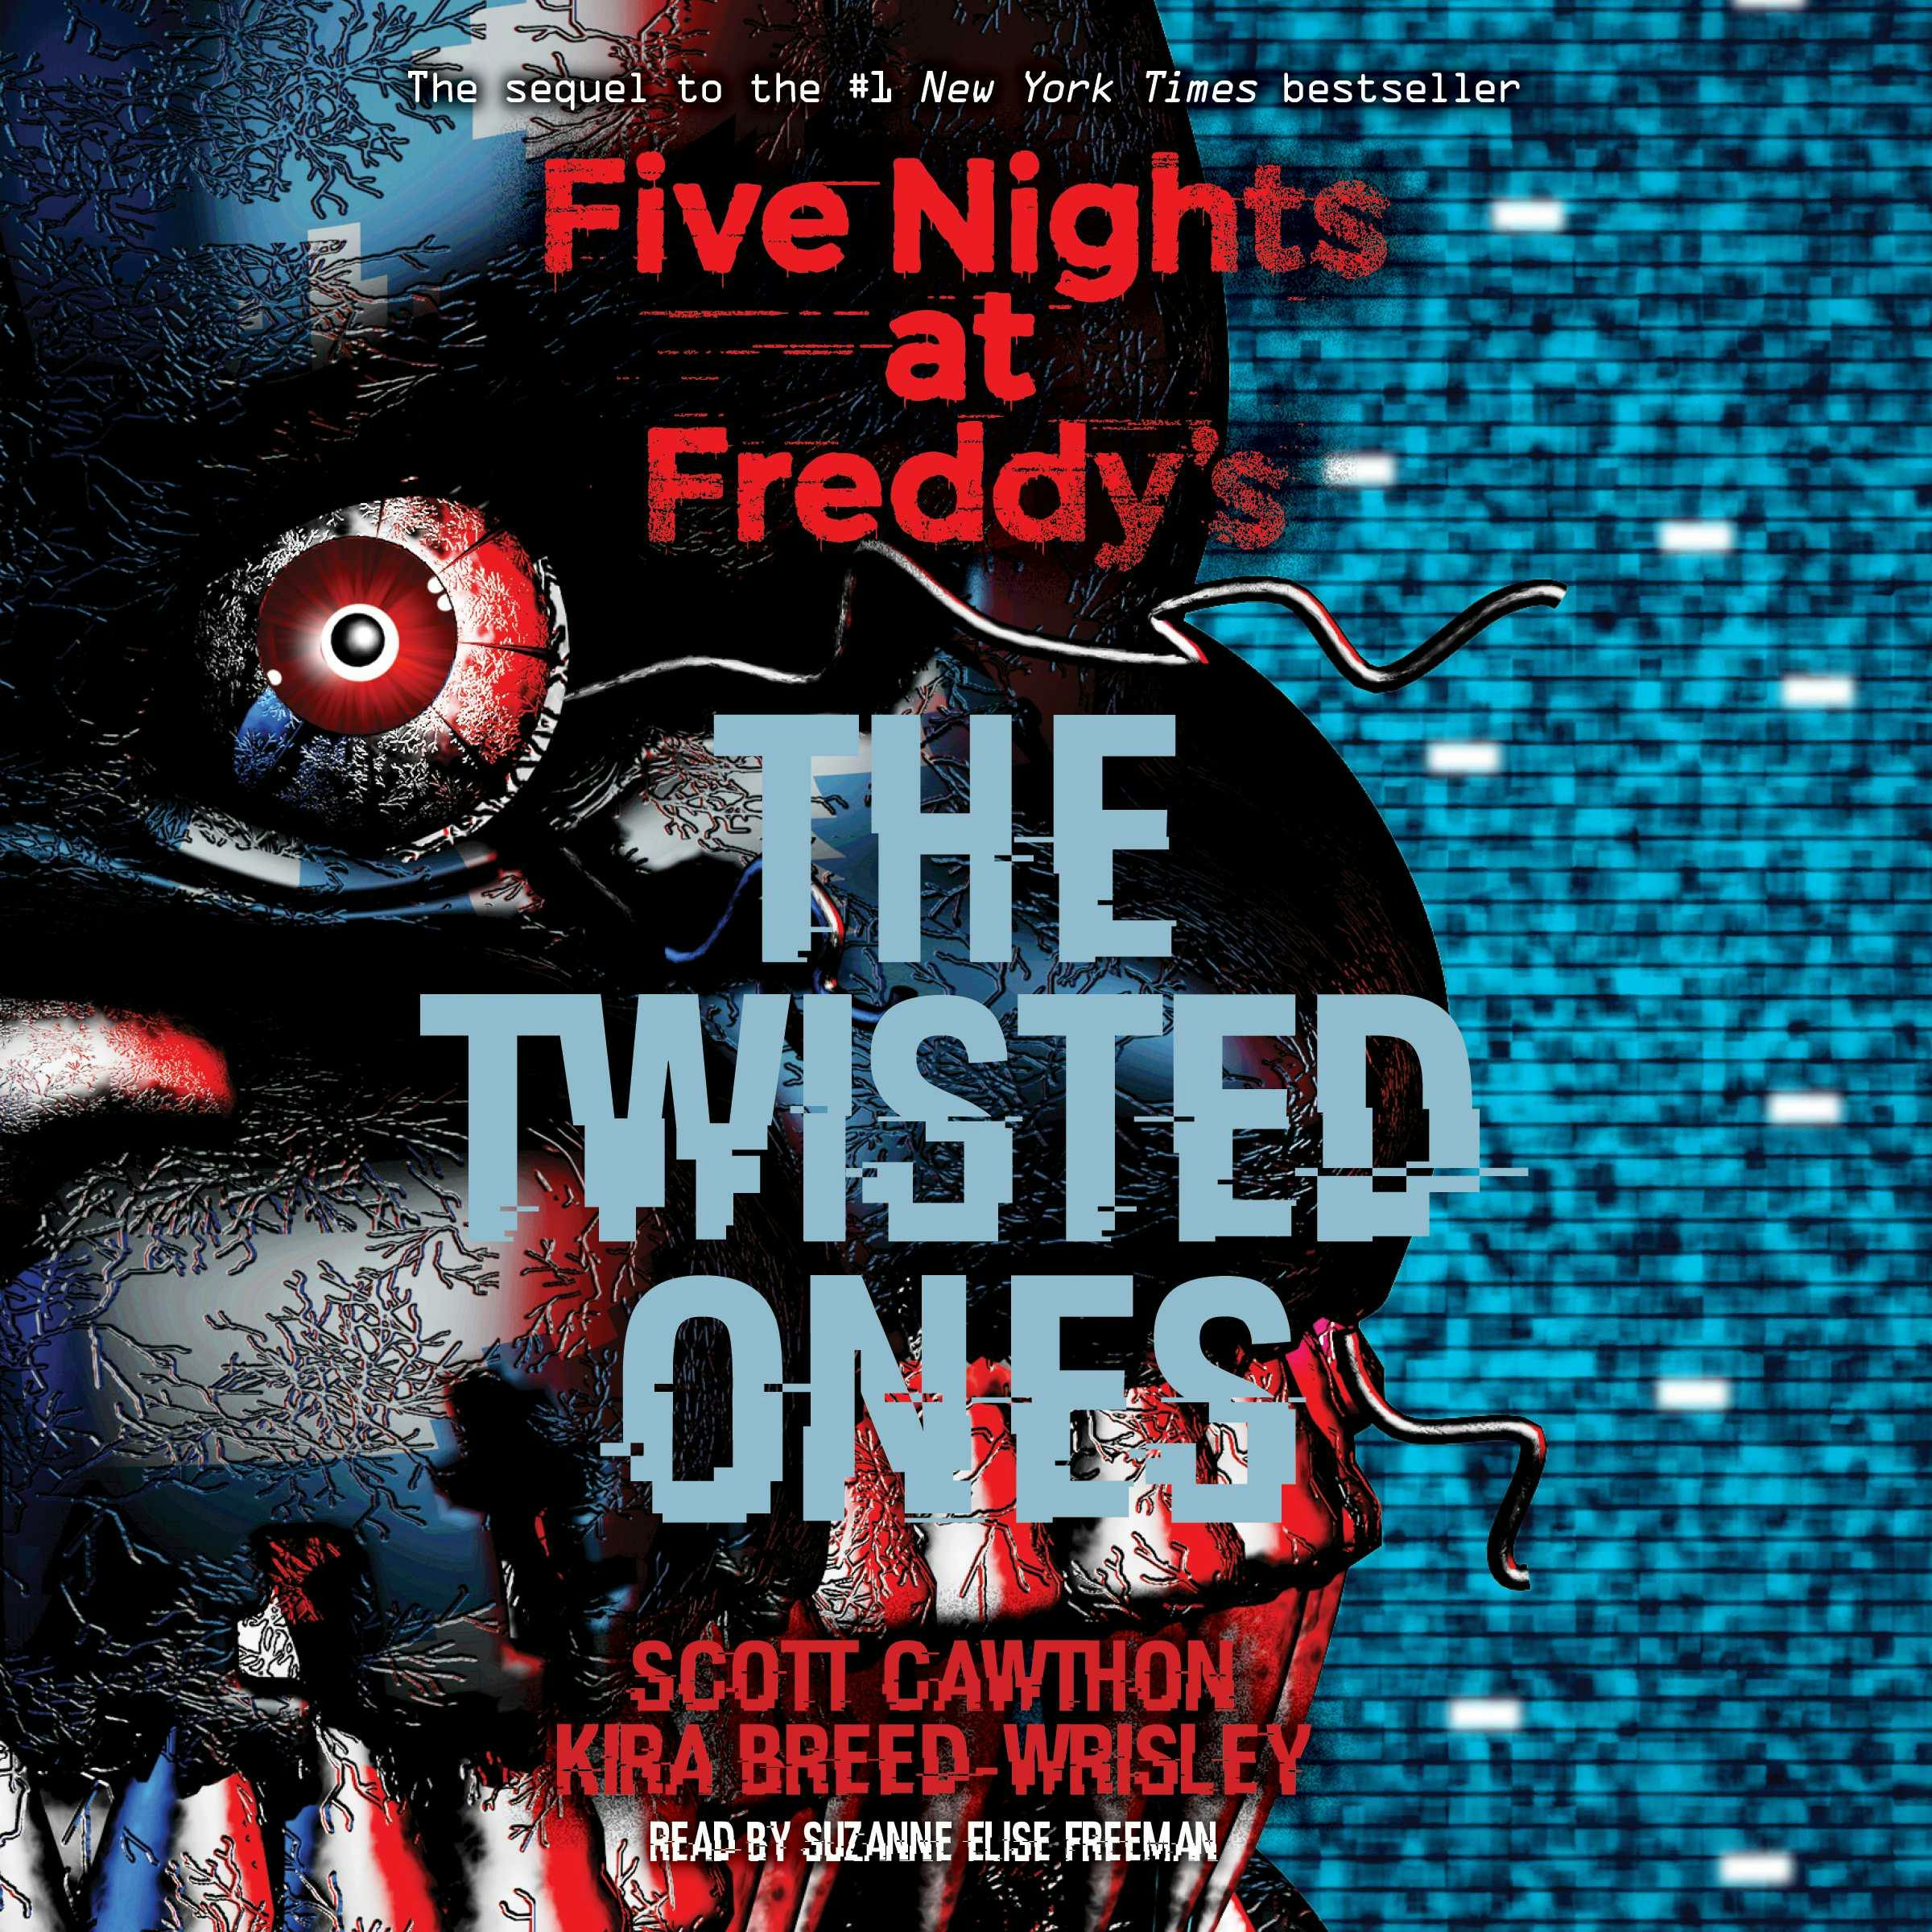 Five Nights at Freddy's, Book 2: The Twisted Ones - Kira Breed-Wrisley, Scott Cawthon